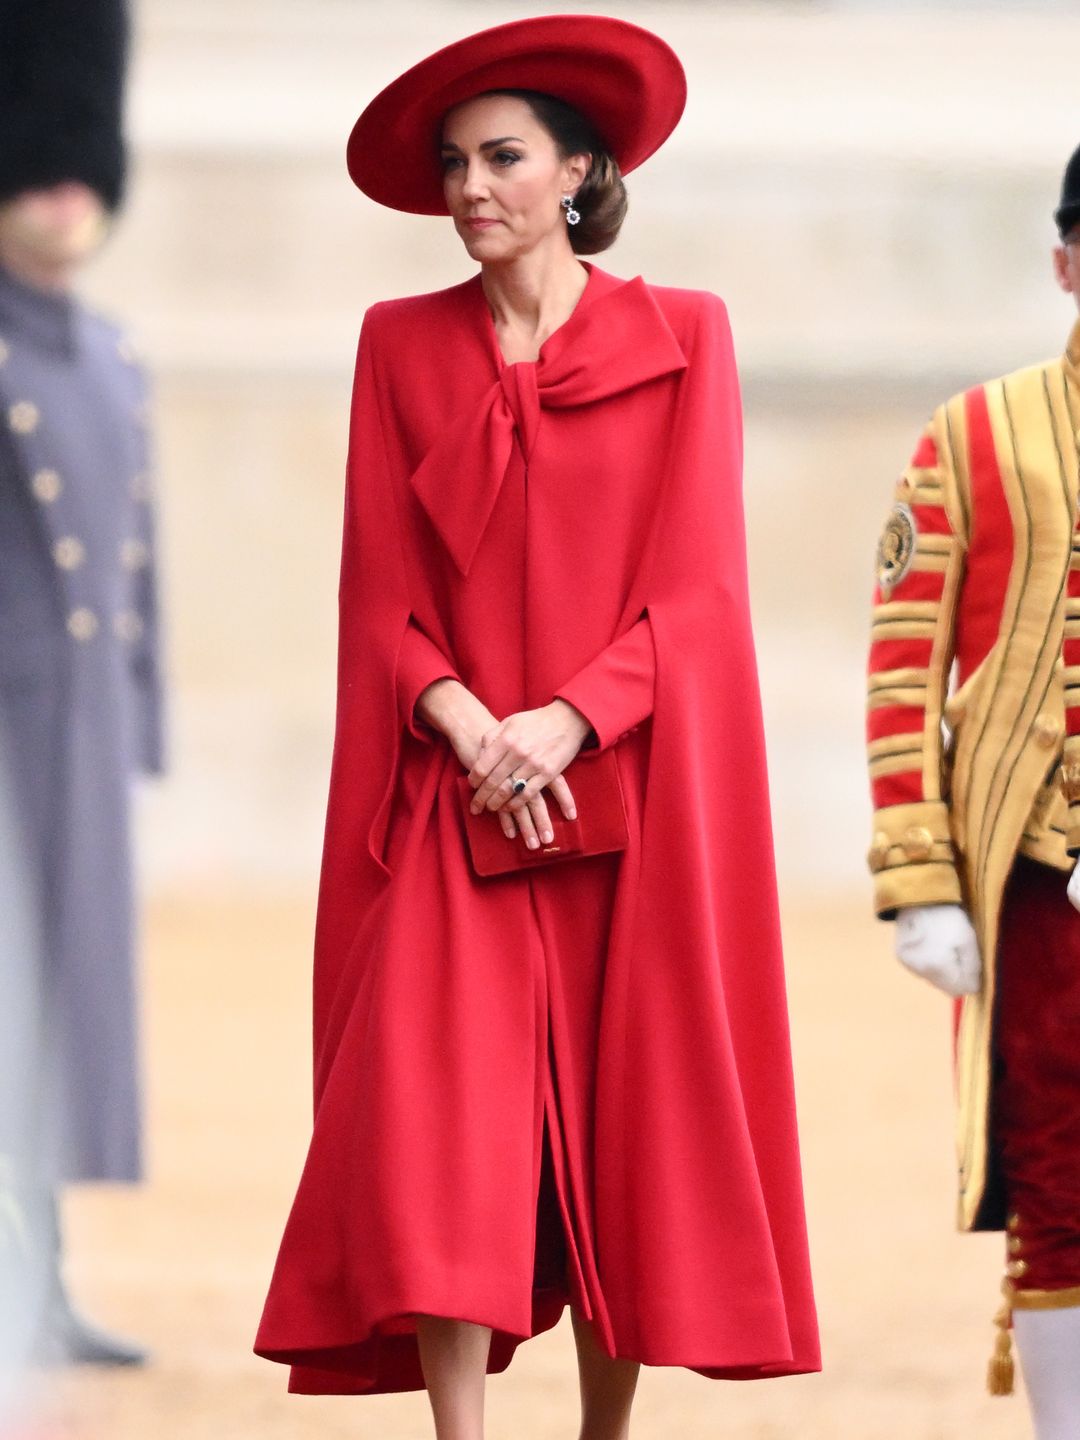 Catherine, Princess of Wales attends a ceremonial welcome for The President and the First Lady of the Republic of Korea at Horse Guards Parade wearing Catherine Walker